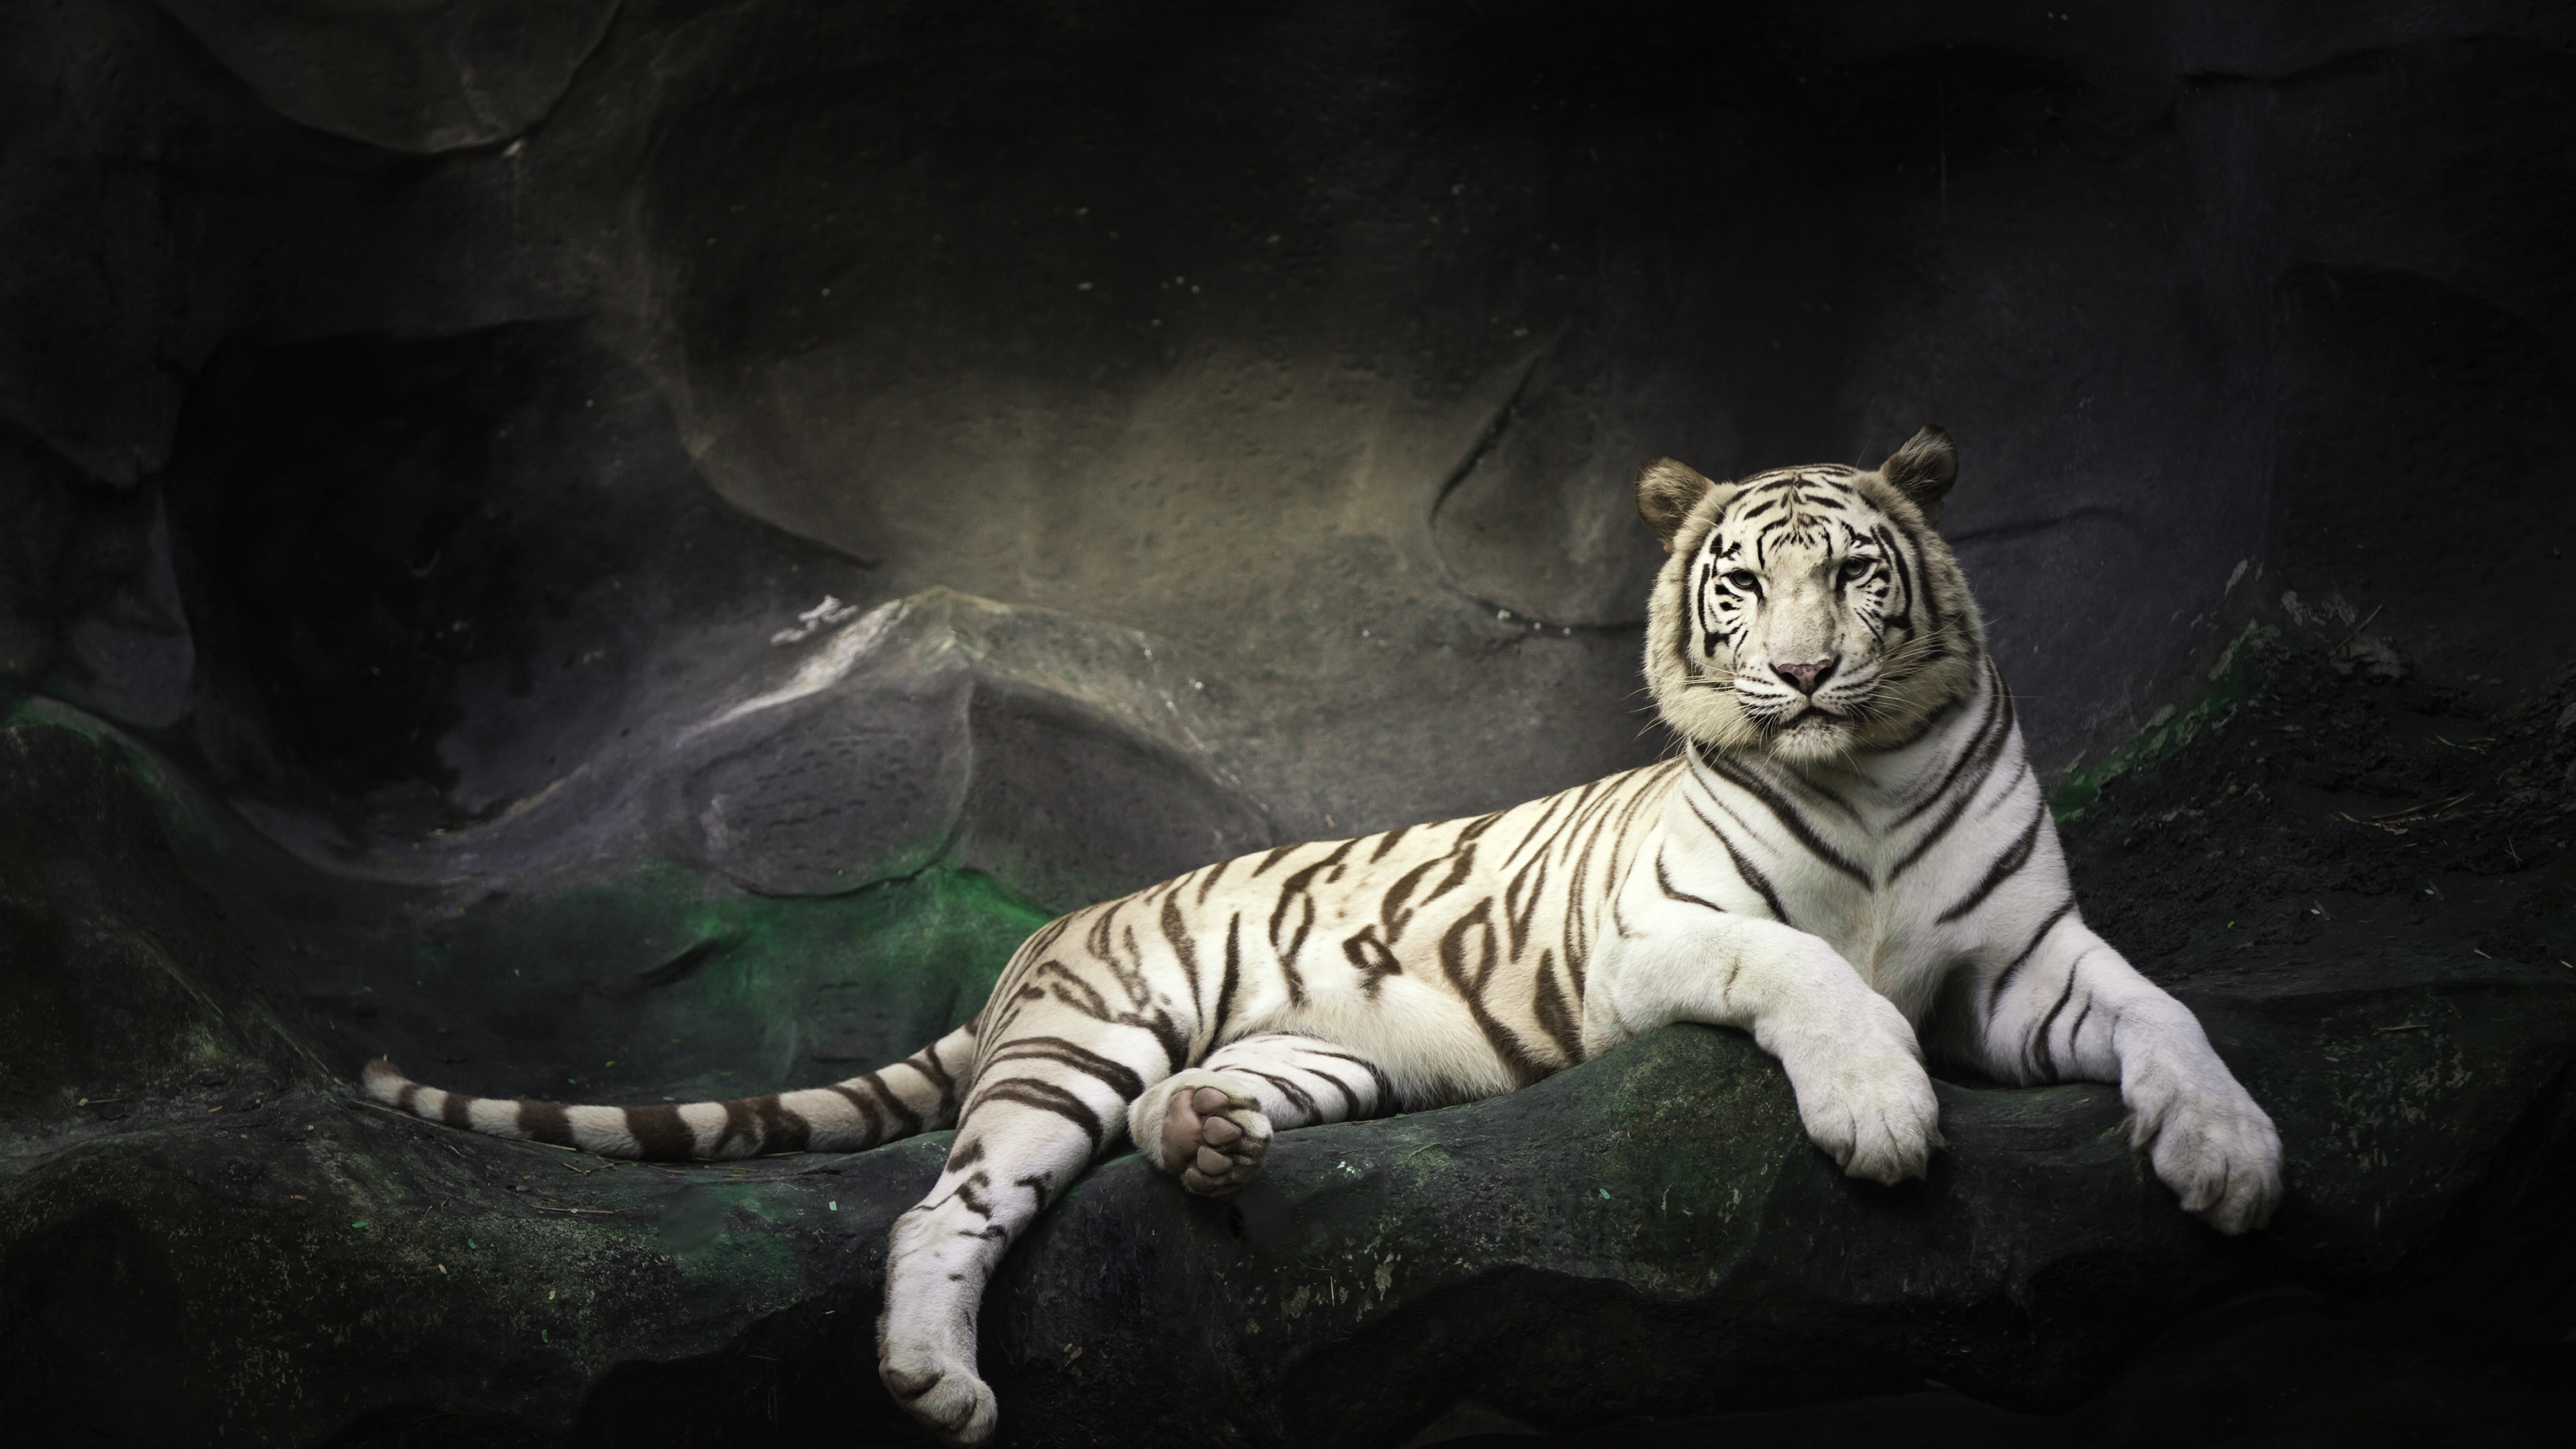 White Tiger Wallpapers  Get Free top quality White Tiger Wallpapers for  your desktop PC background  Tiger pictures White tiger White bengal tiger